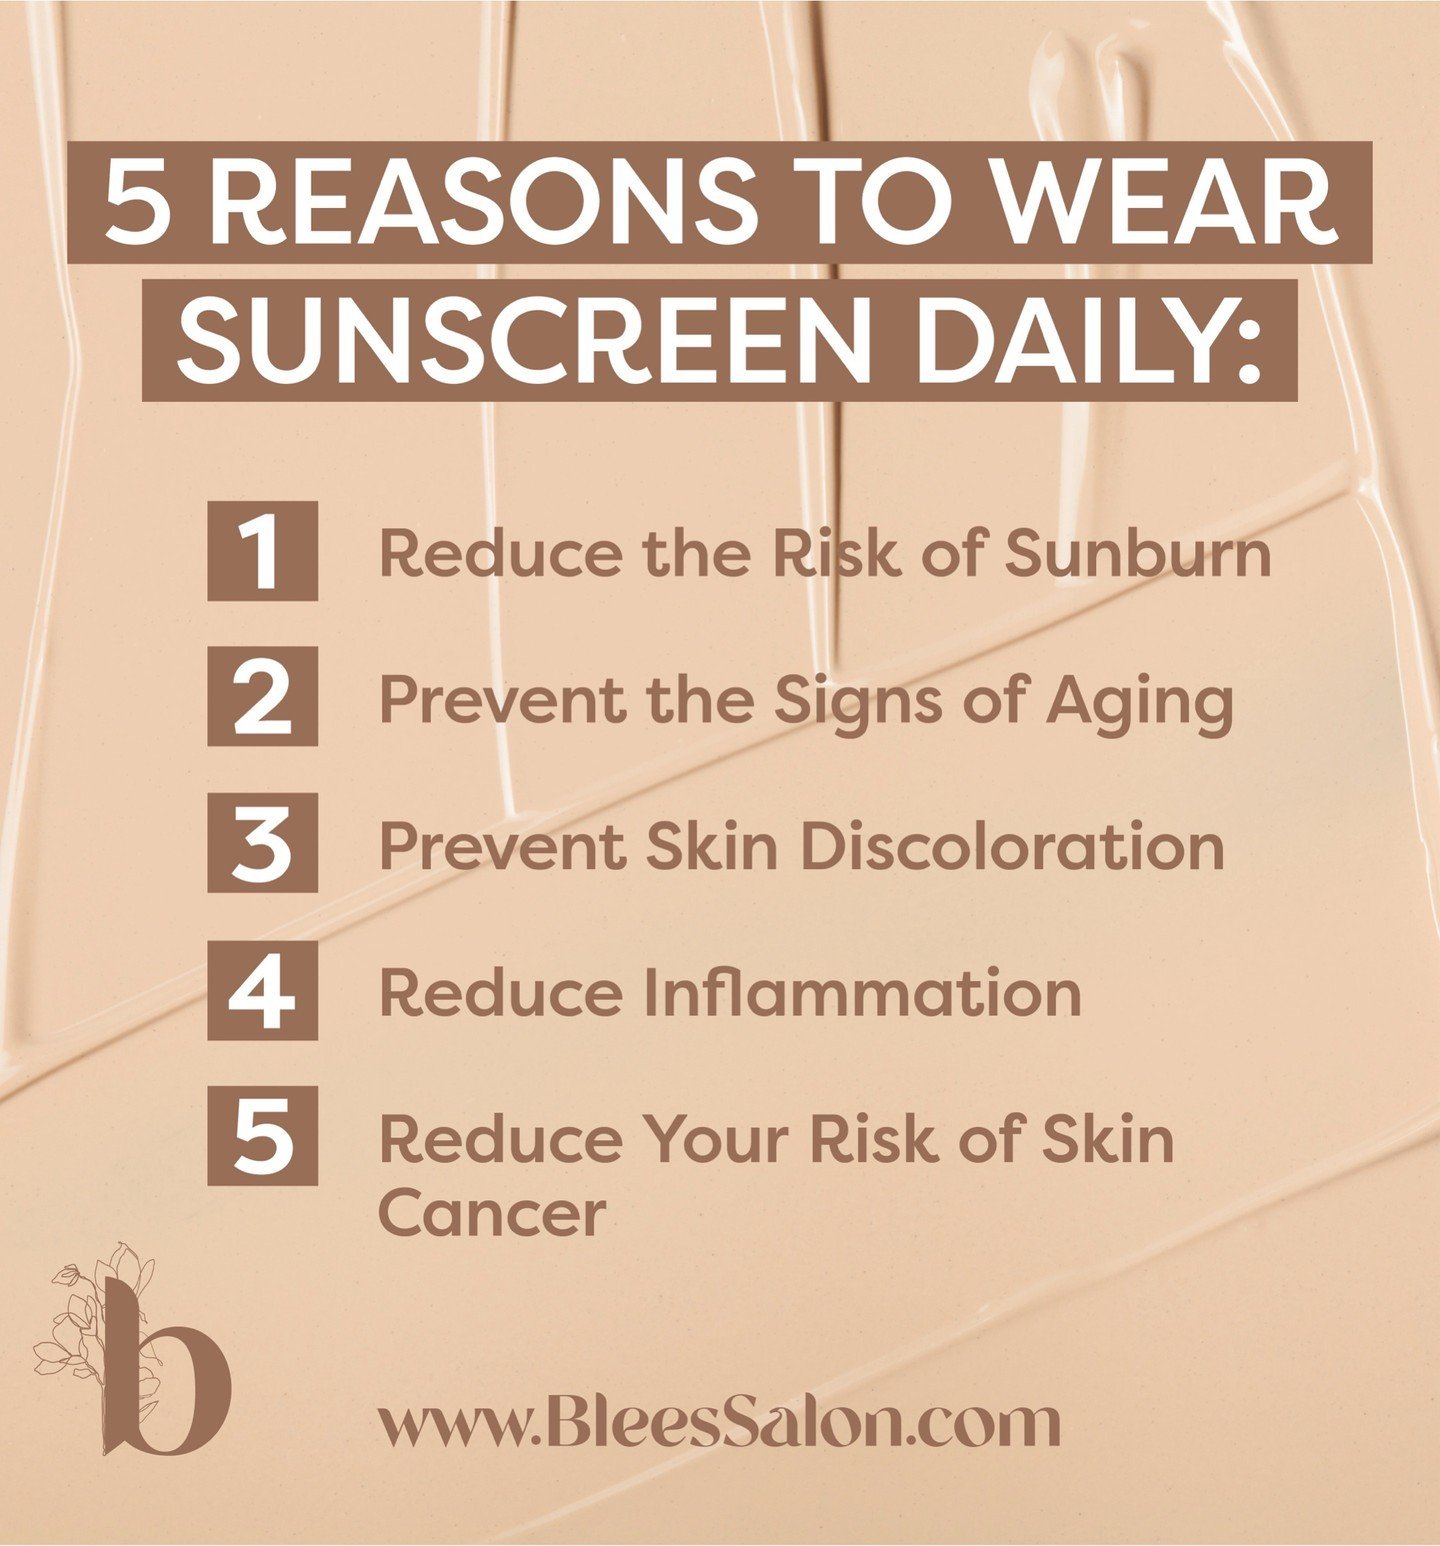 Wear your SPF daily!! It is such an important part of your routine and skin health 🌞
 #skincareroutine #skincare #skinessentials #skintips #facecare